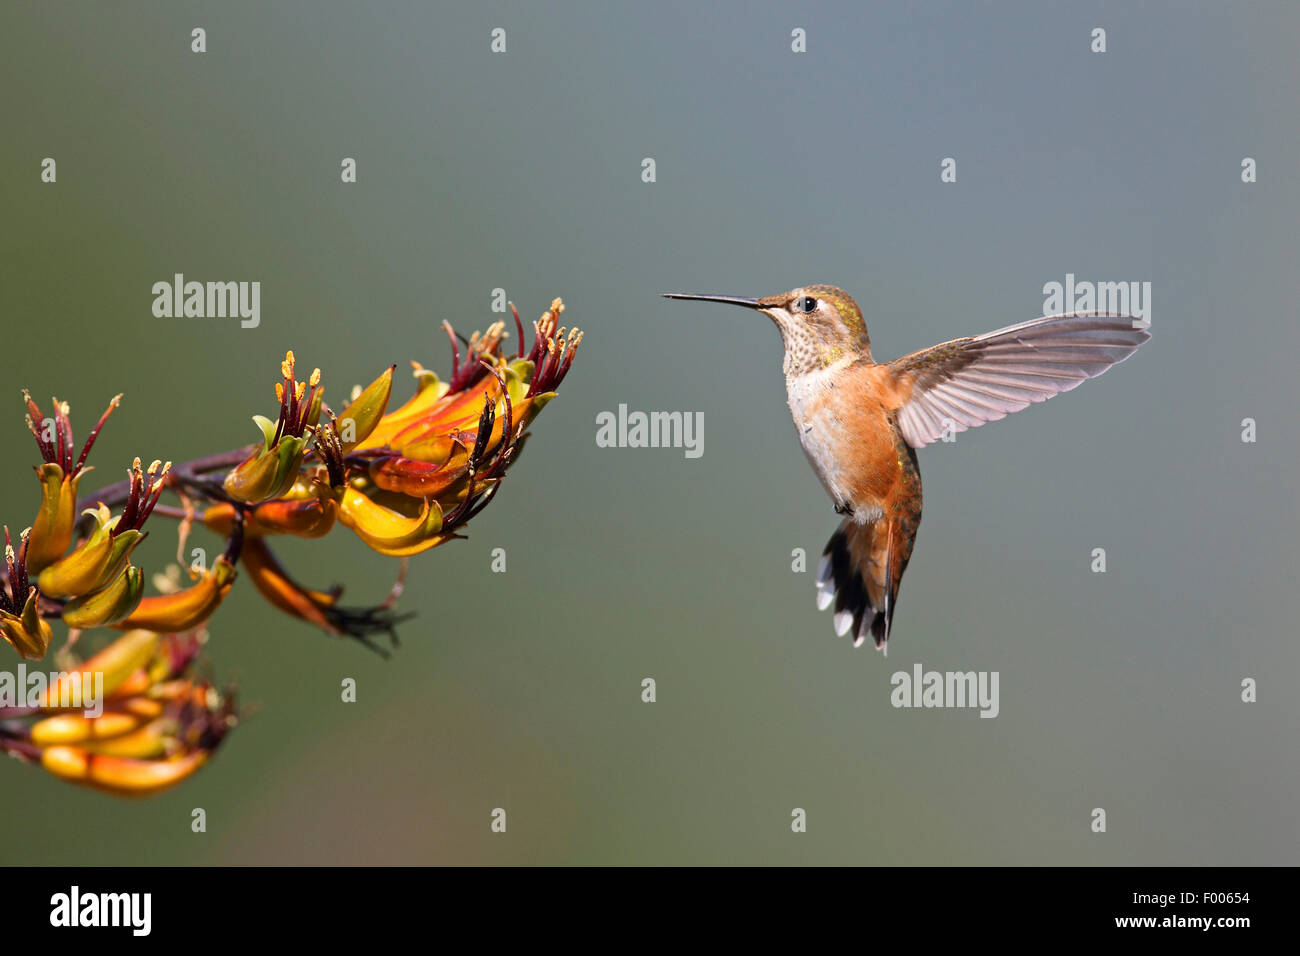 rufous hummingbird (Selasphorus rufus), female flying in front of a blossom, Canada, Vancouver Island Stock Photo